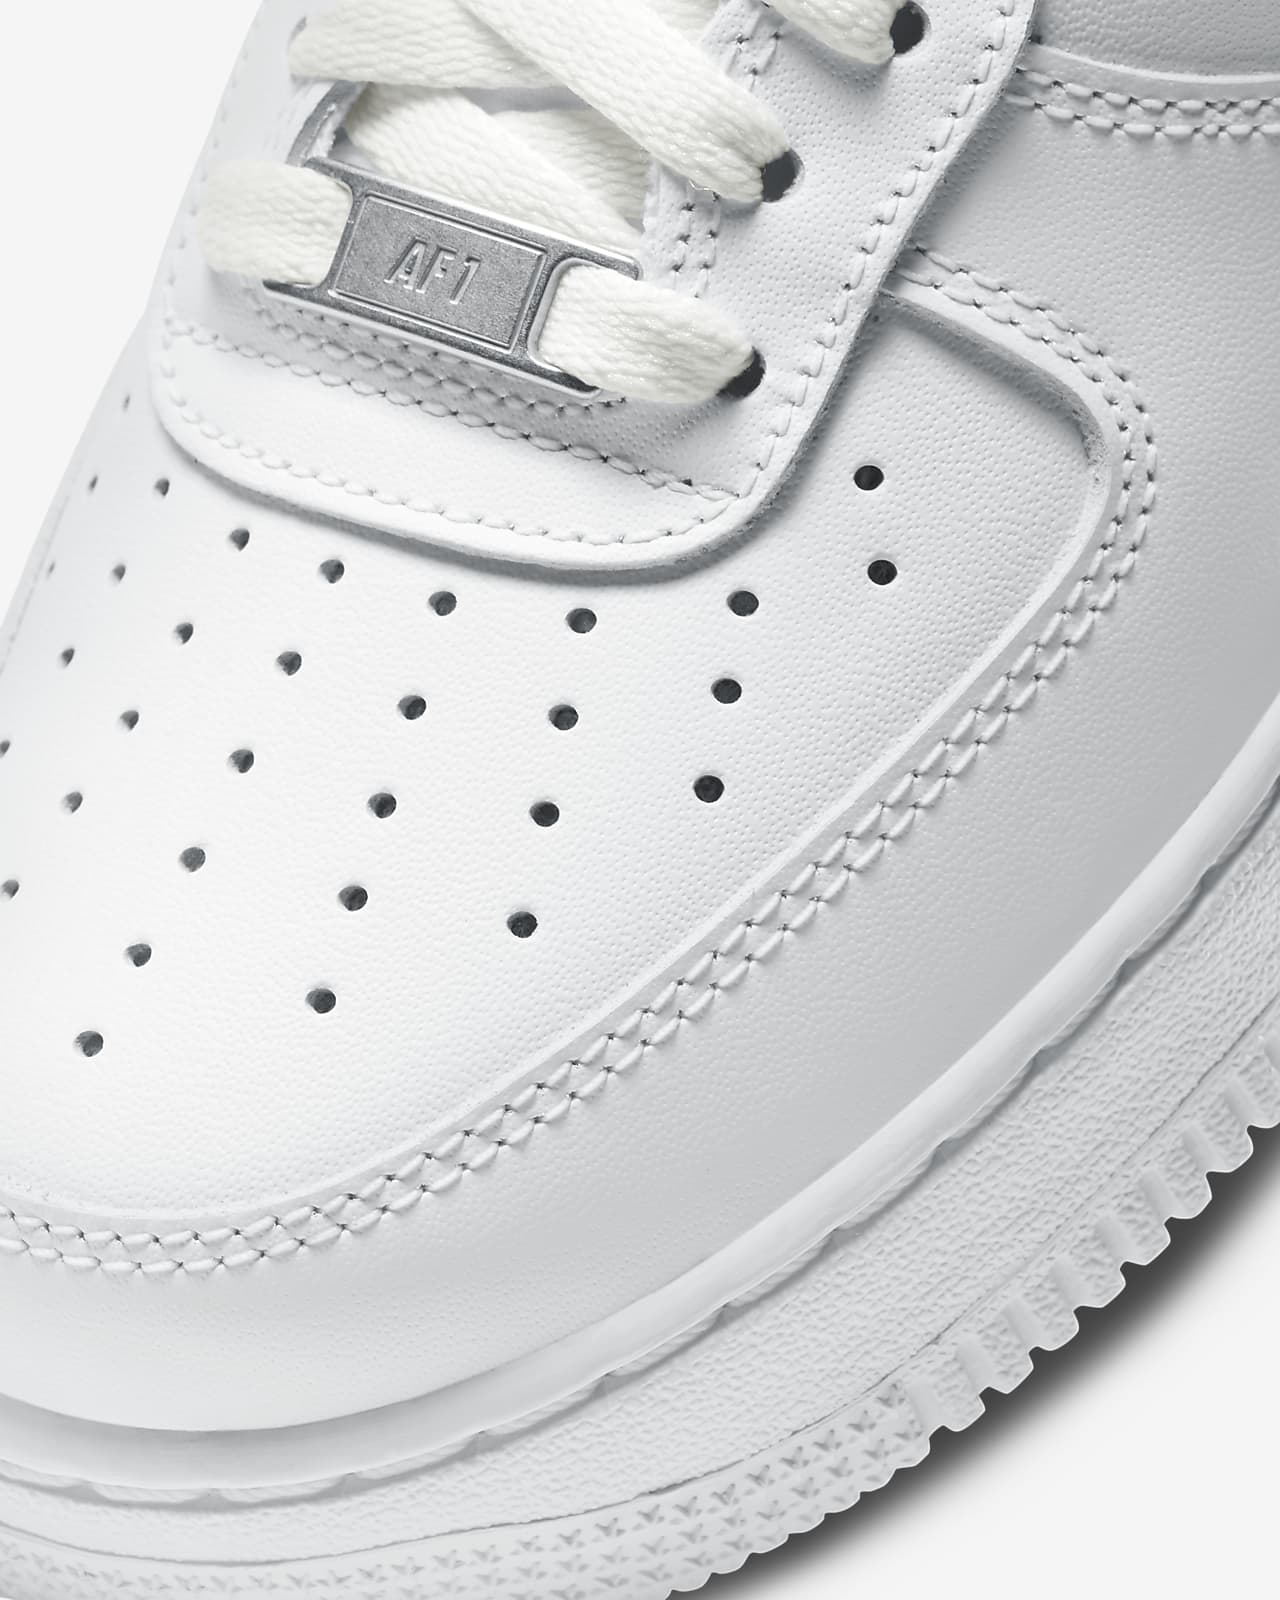 completely upper Unpretentious Nike Air Force 1 '07 Women's Shoes. Nike.com